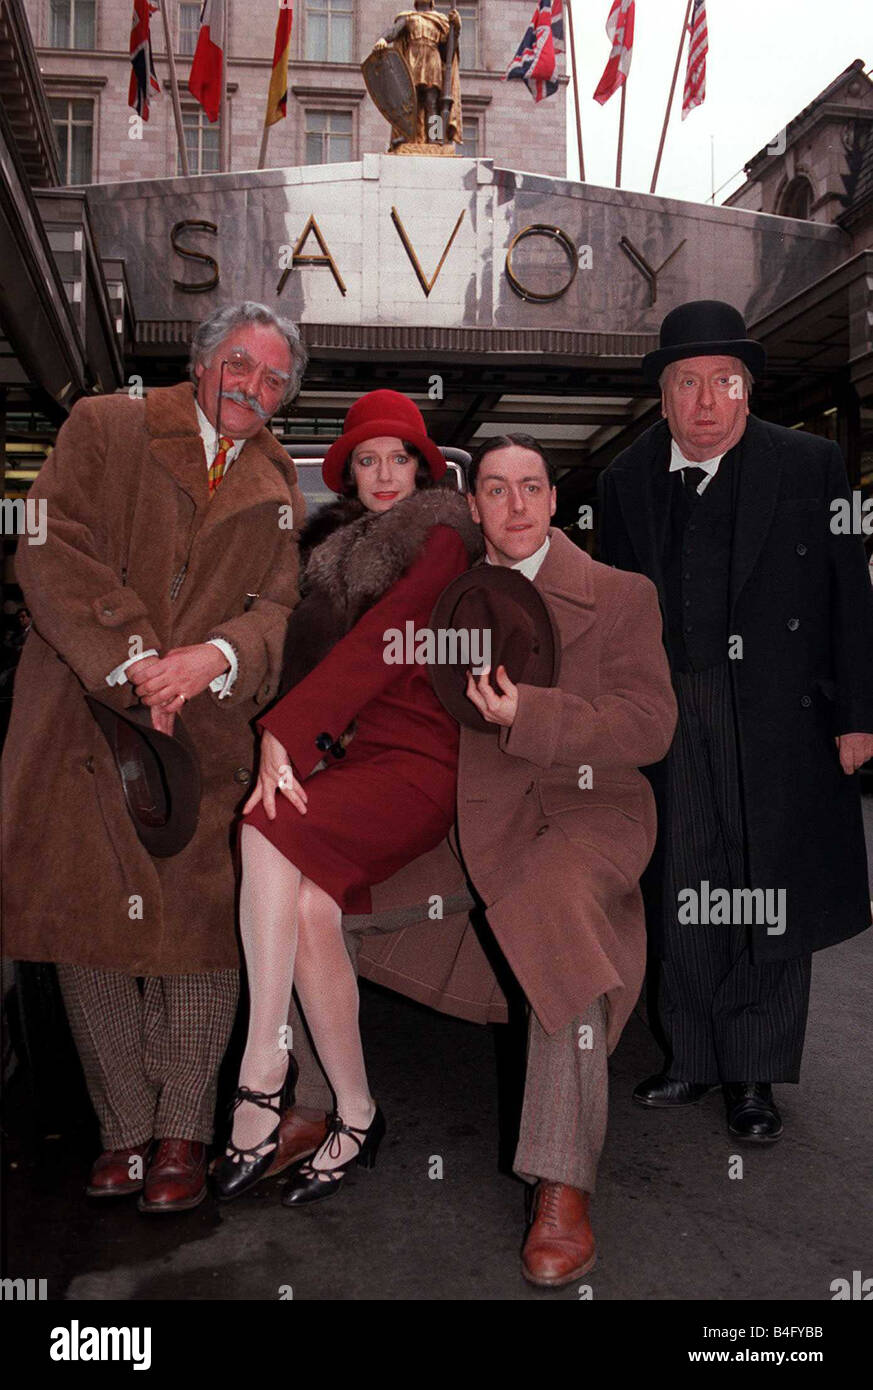 Griff Rhys Jones outside the Savoy hotel January 1991 With Fellow Actors Dinsdale Landen Hugh Lloyd And Actress Belinda Lang Who Star In The Show Thark Mirrorpix Stock Photo